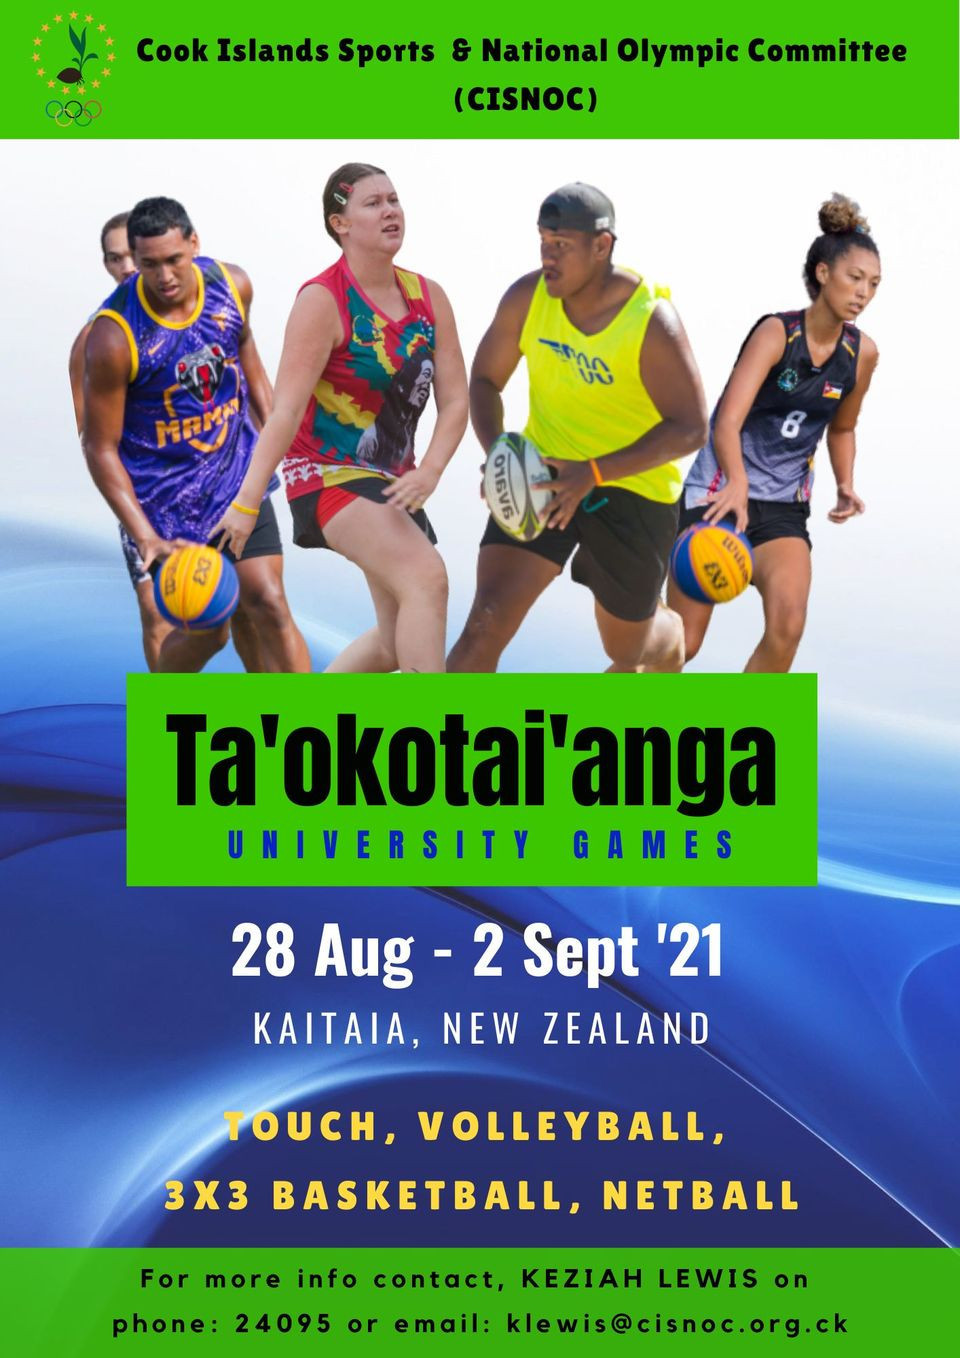 Athletes from New Zealand with Cook Islands heritage will be invited to compete at the Ta'okotai'anga University Games ©CISNOC